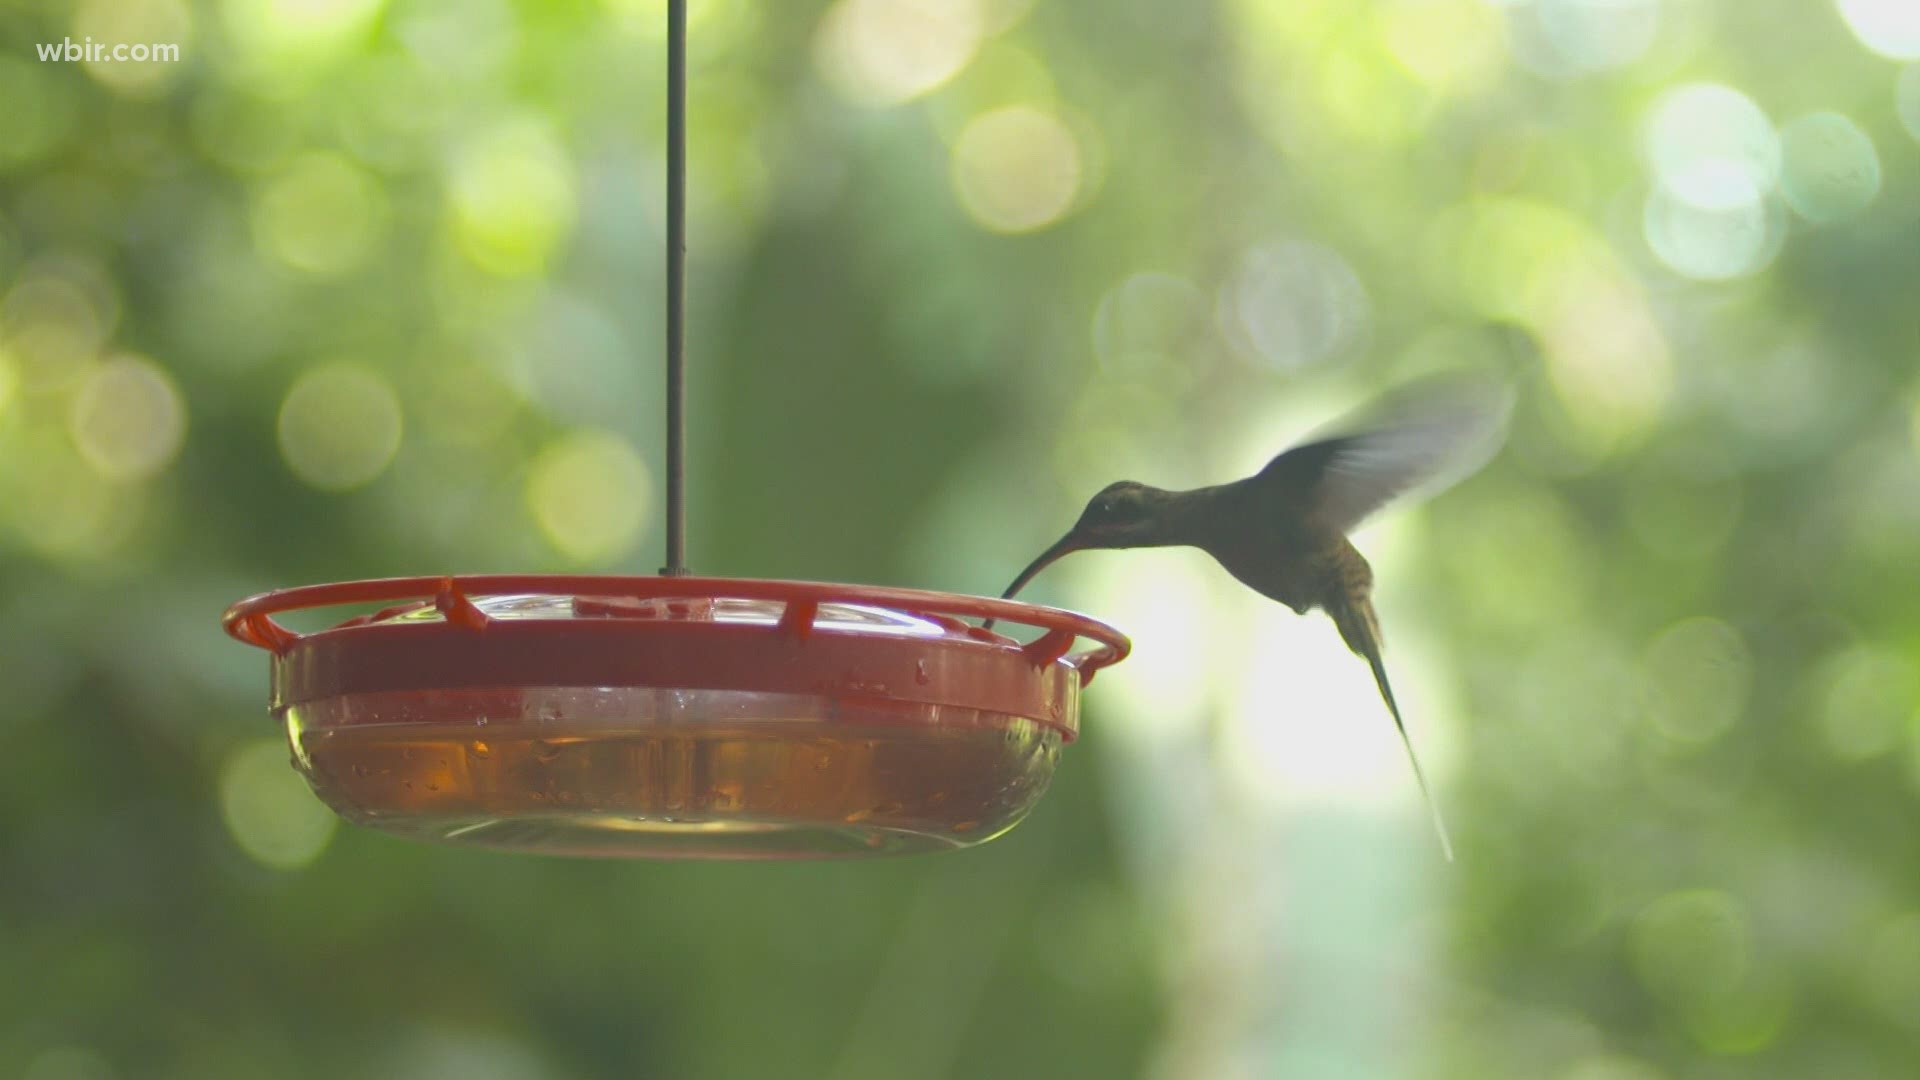 Gardeners may soon spot hummingbirds around their flowers in East Tennessee.